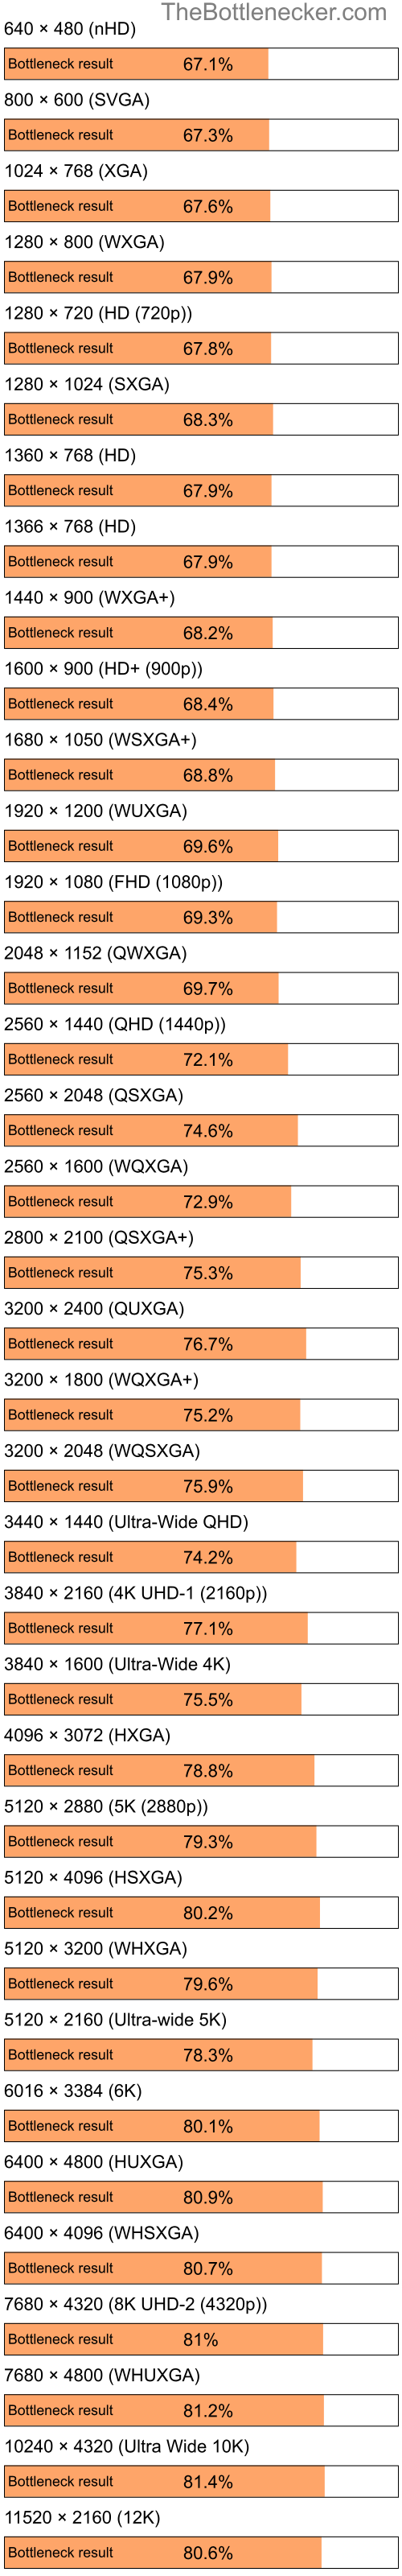 Bottleneck results by resolution for Intel Atom Z520 and NVIDIA GeForce 310M in Graphic Card Intense Tasks